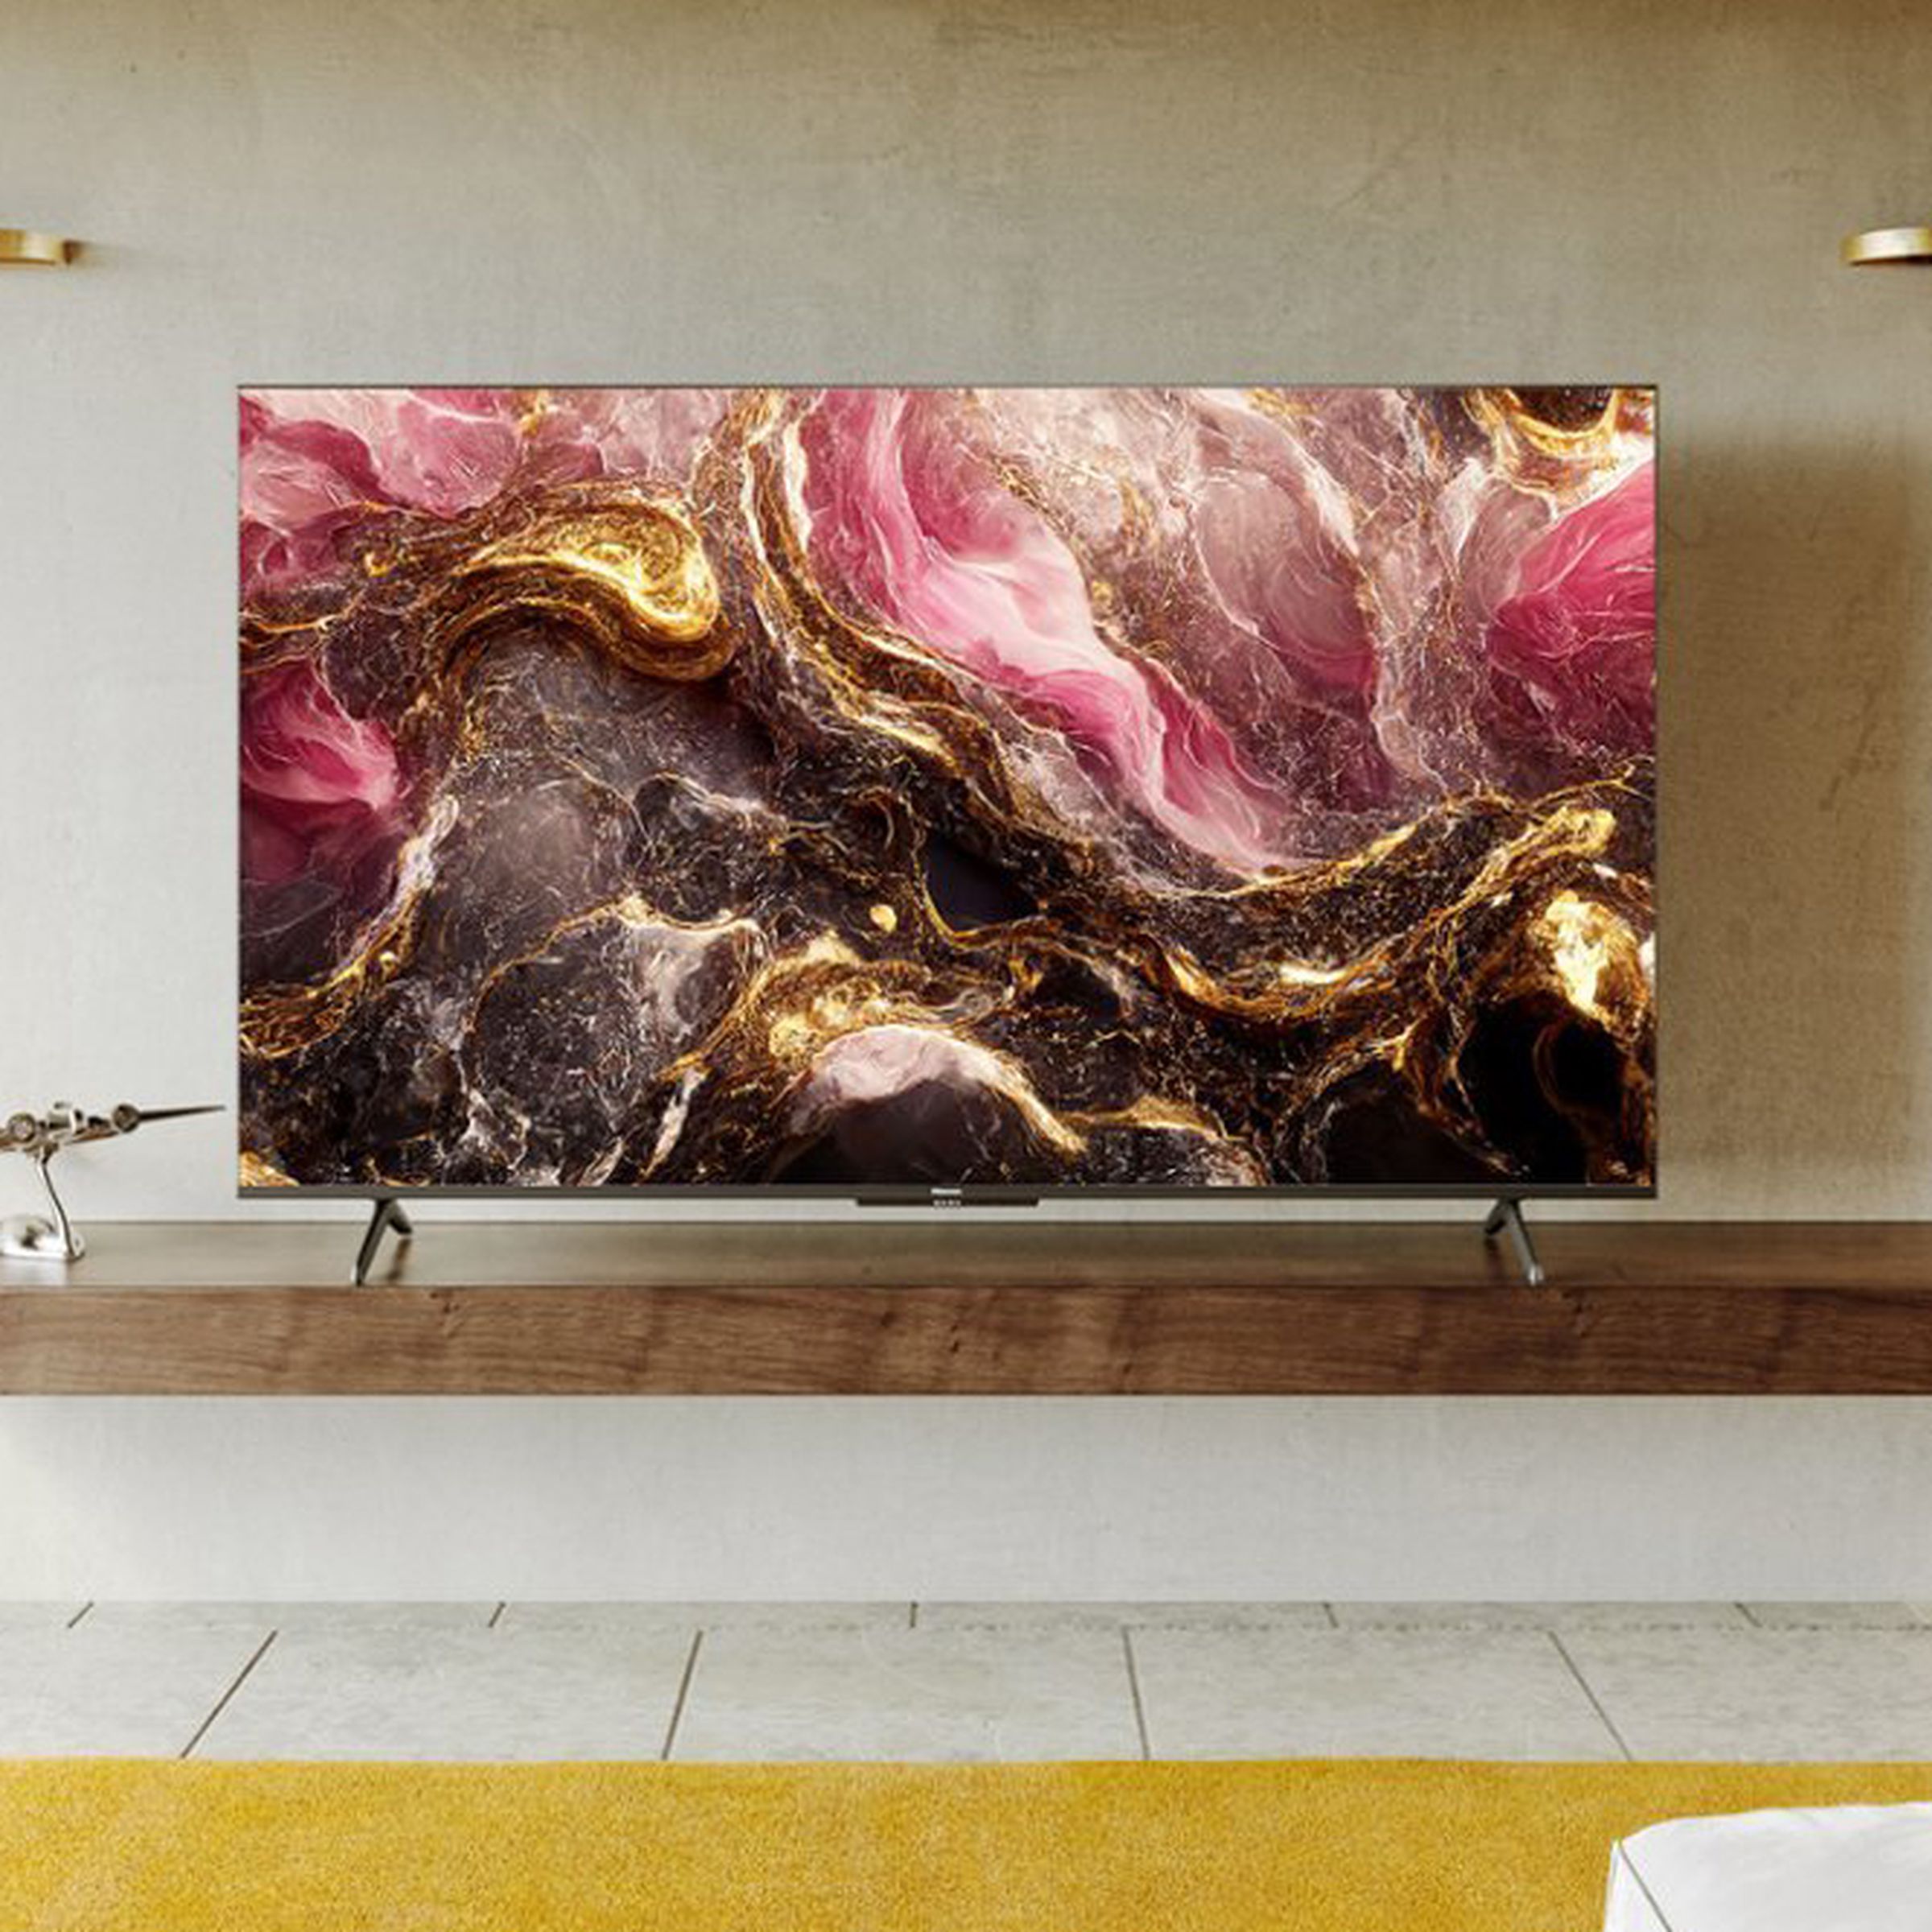 An image of Hisense’s 55-inch U6K Series TV resting on a wooden shelf in a white room.